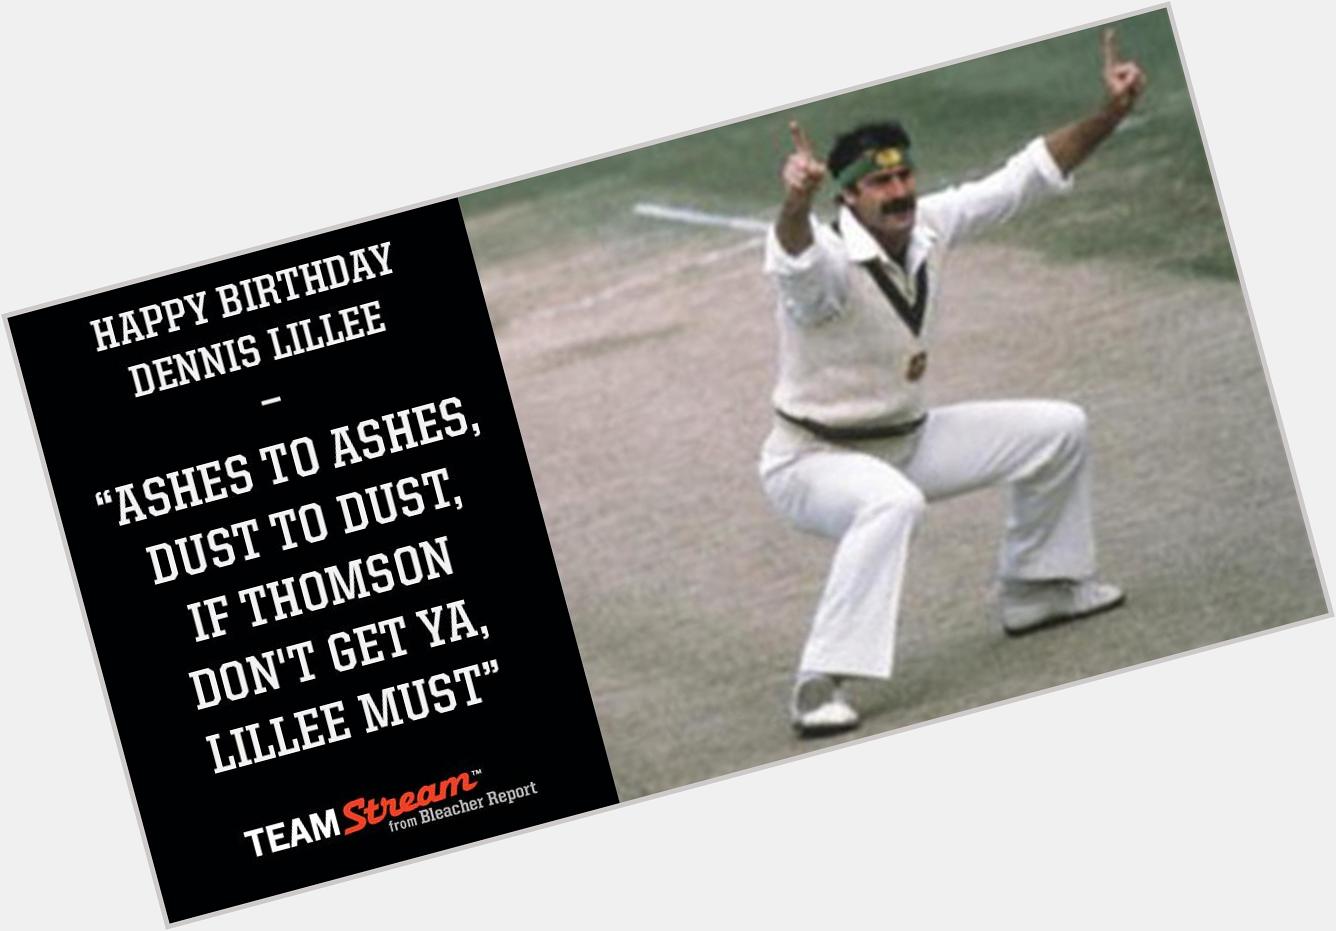 Happy 66th birthday to Australian legend Dennis Lillee! Only Warne & McGrath have more Test wickets for 